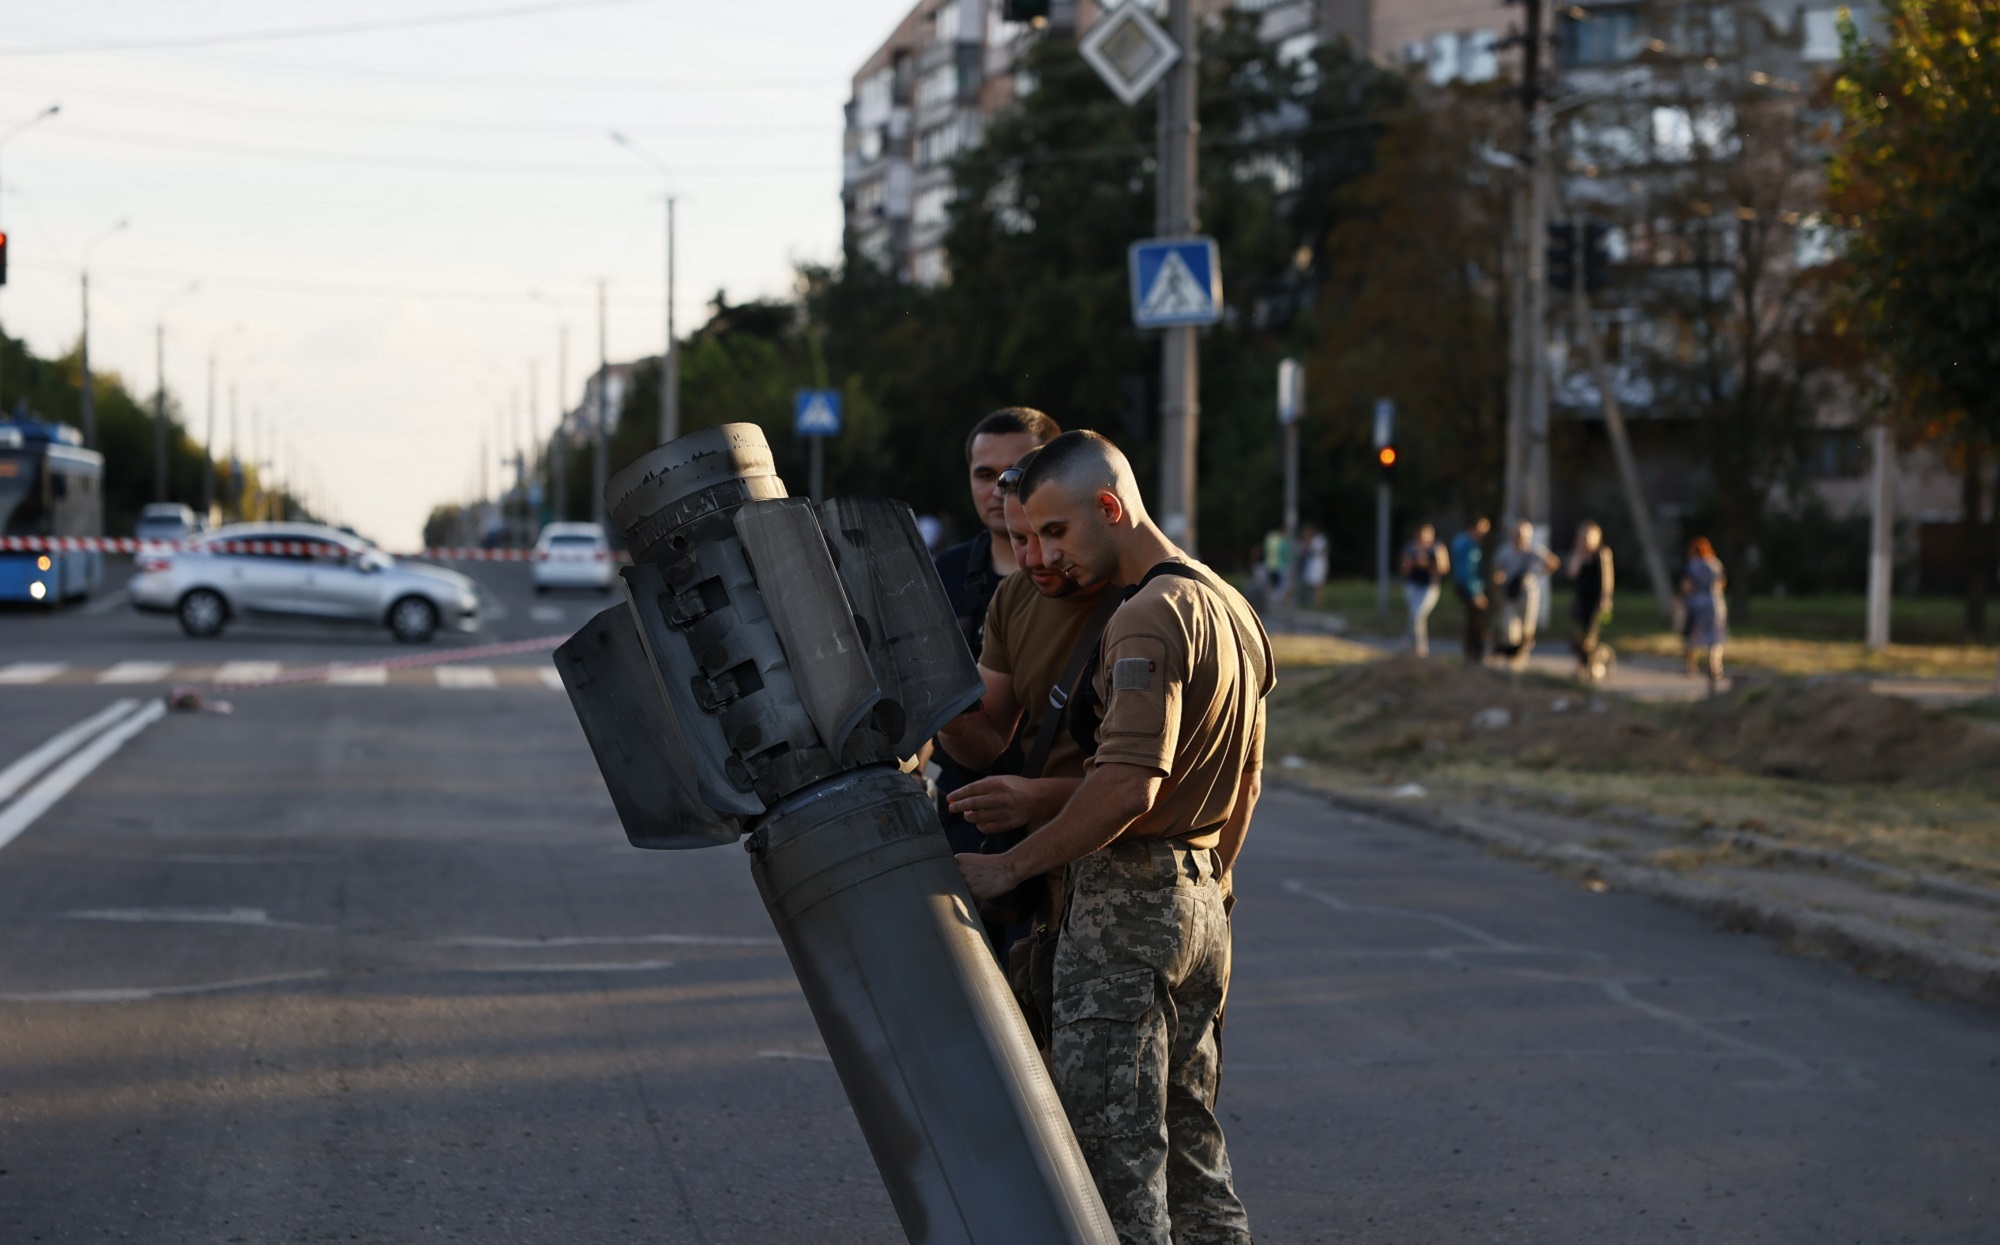 Soldiers inspect a missile that landed in a Ukraine street without detonating.